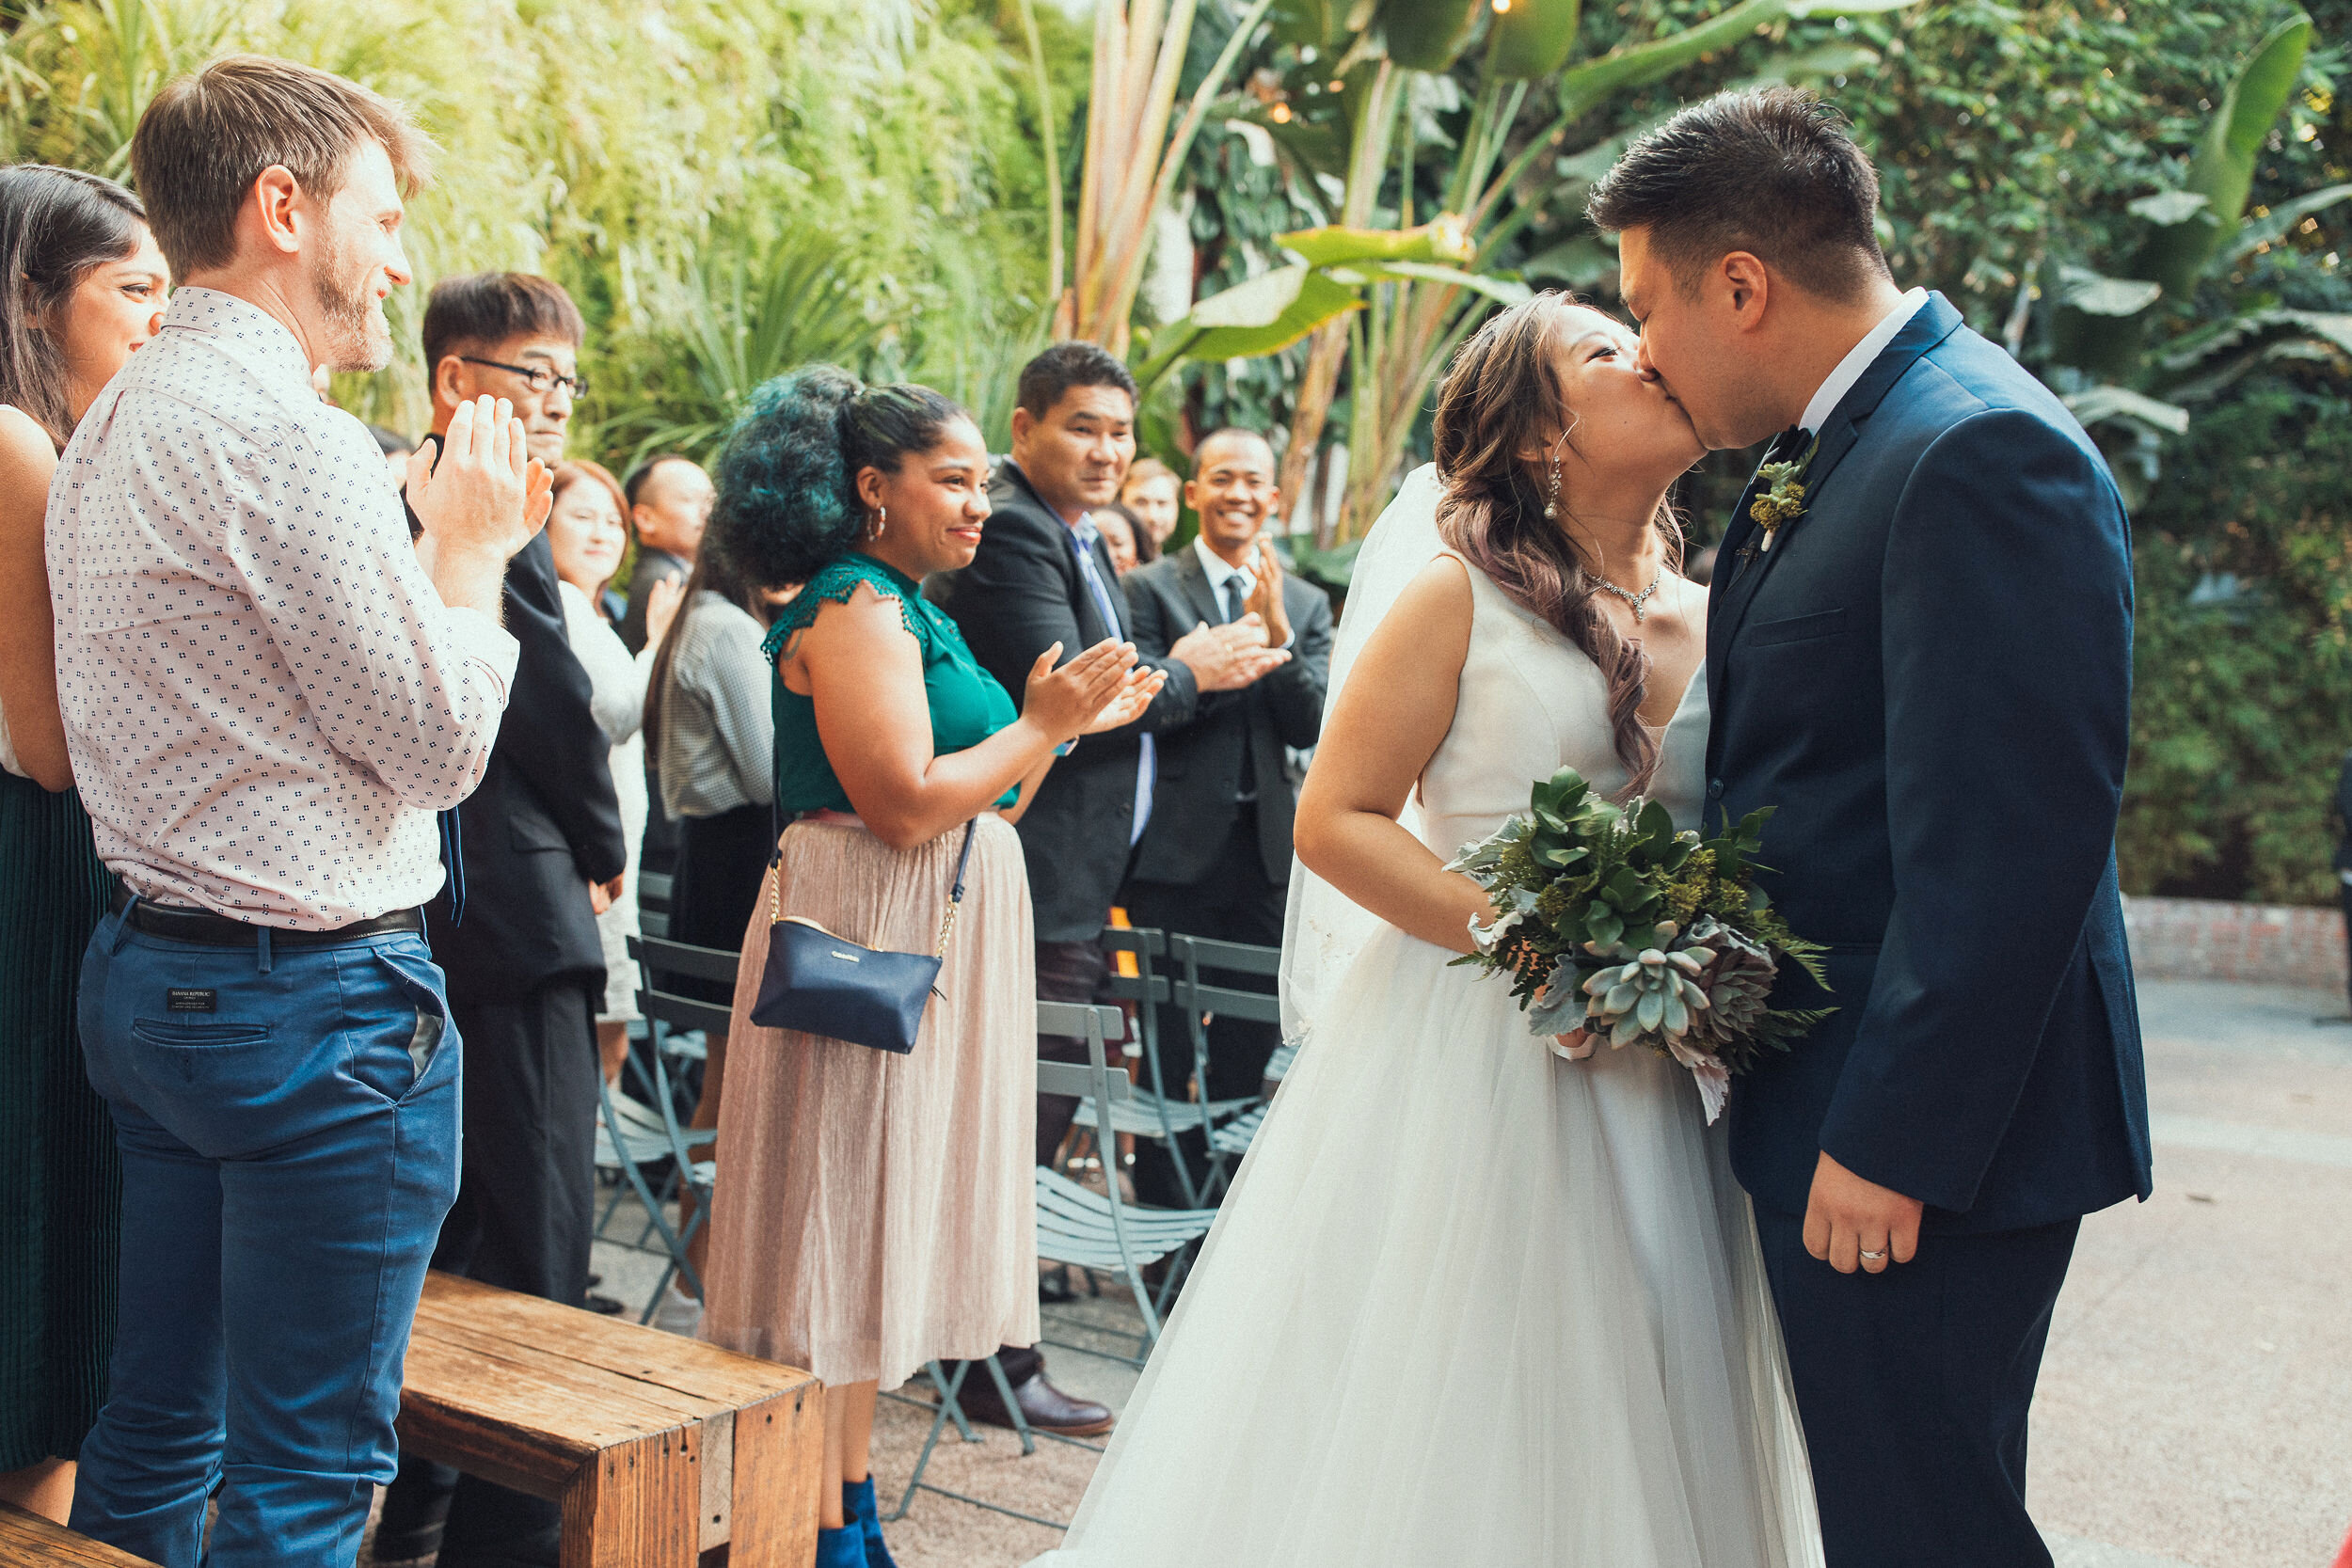 Esther and Dayne's wedding video at the Millwick Wedding Venue in LA